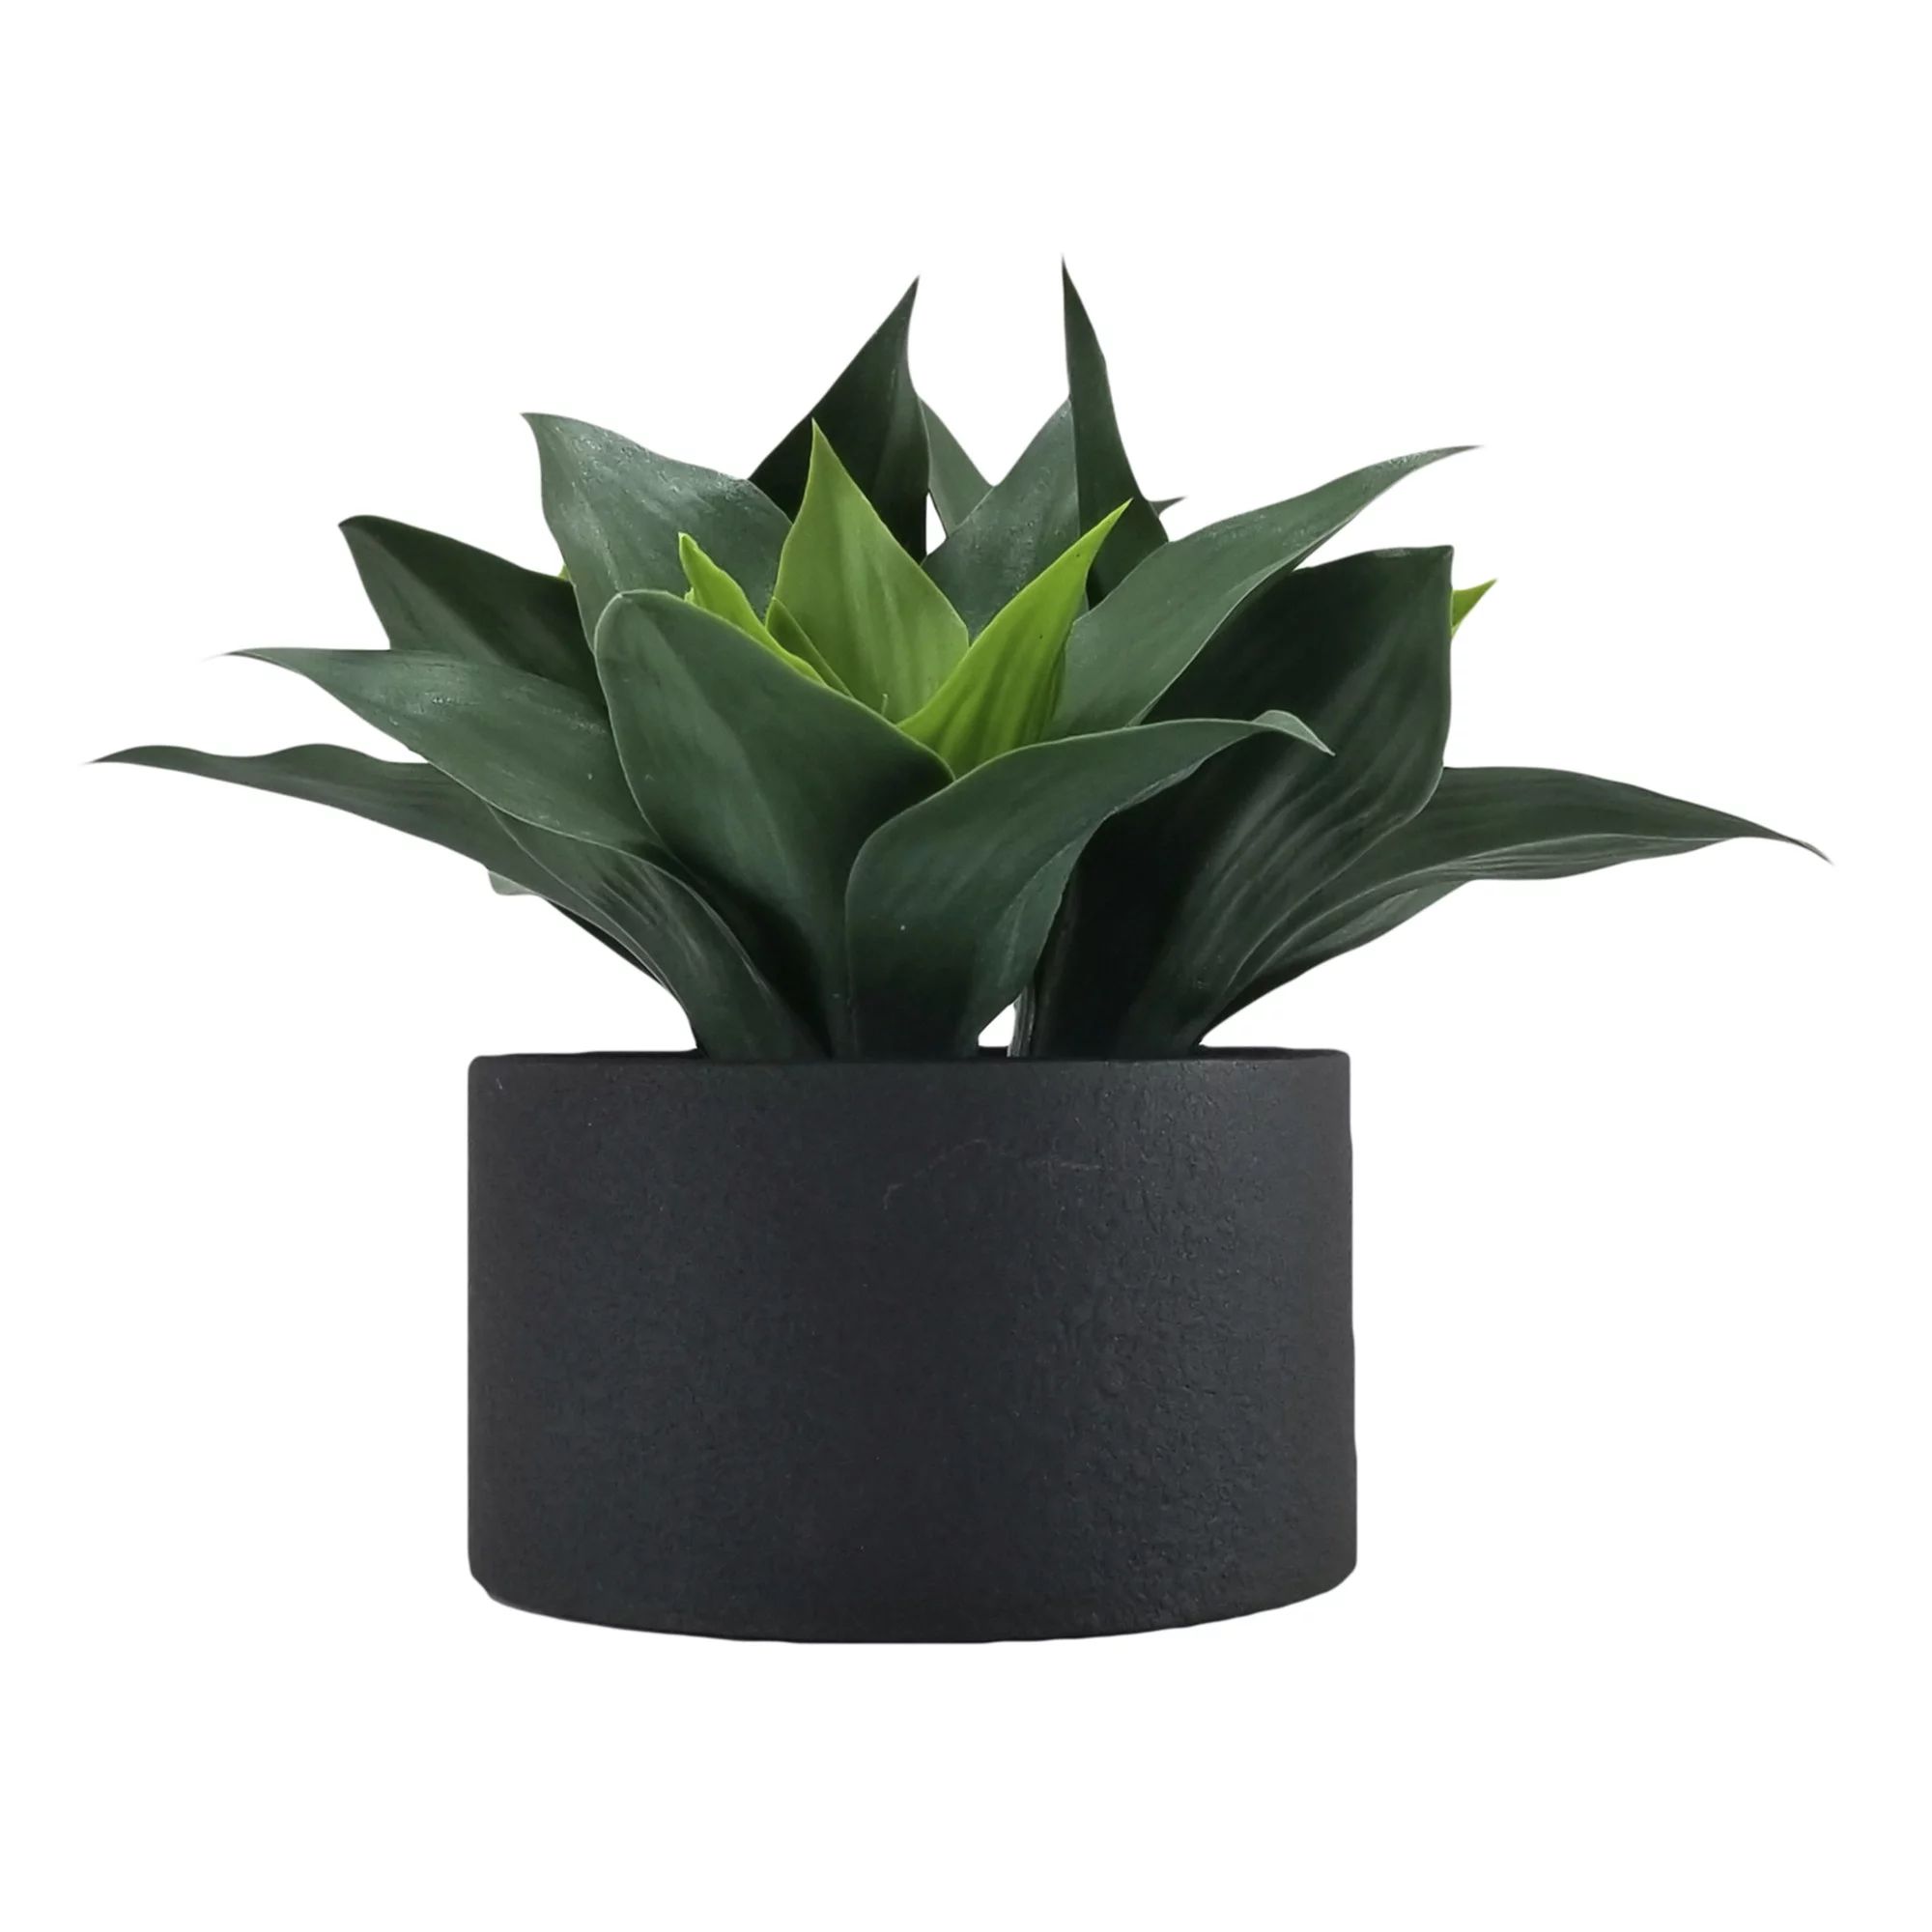 Better Homes & Gardens Faux Agave Plant in Black Planter, 9.25" x 9" | Walmart (US)